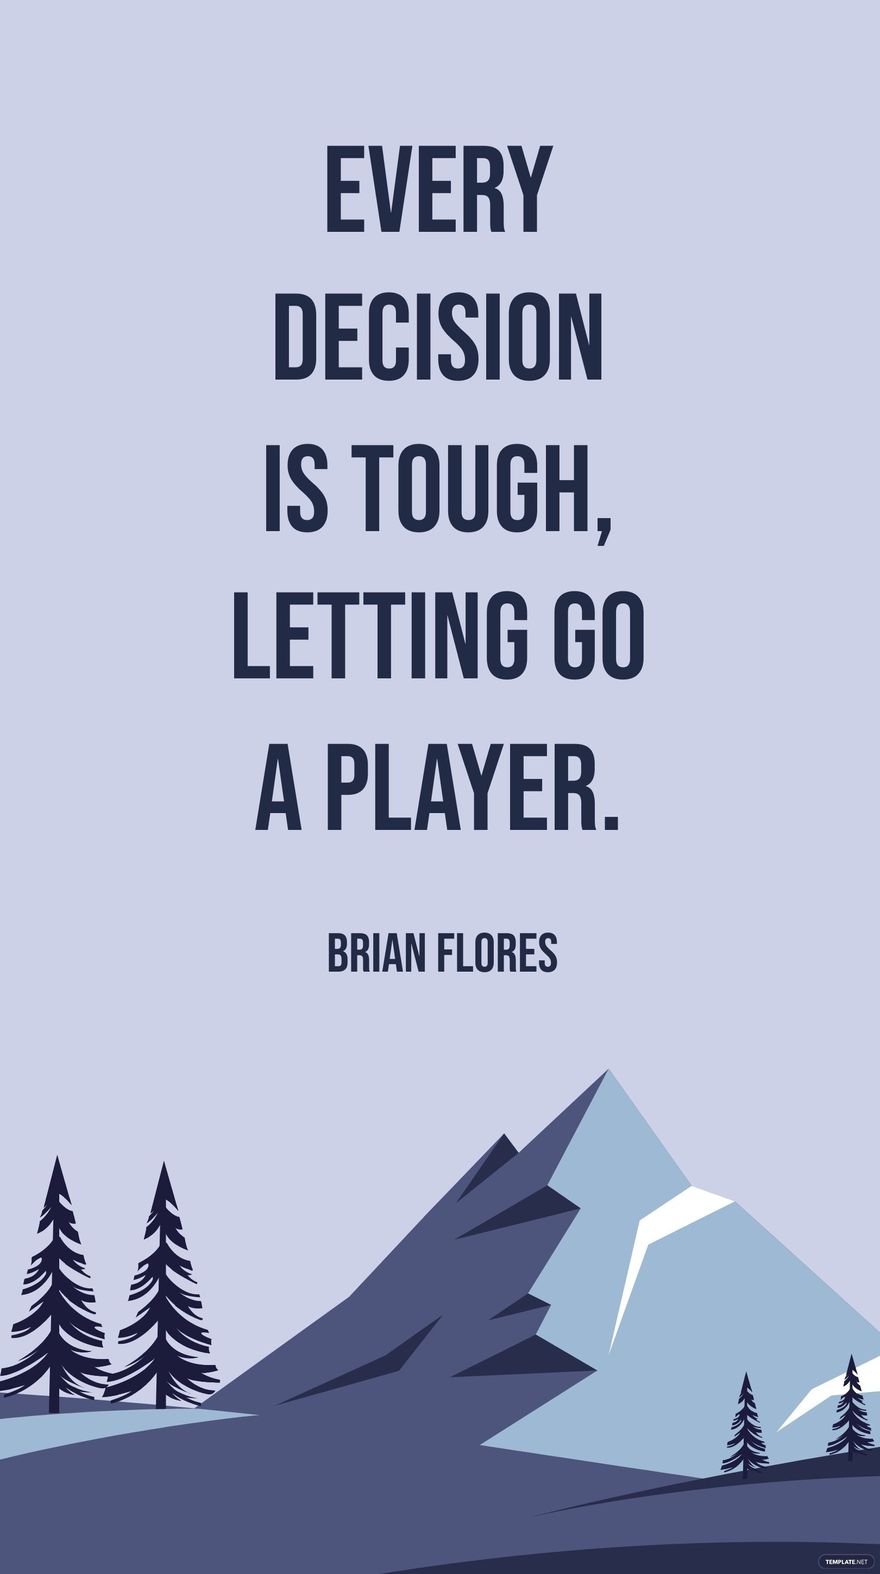 Free Brian Flores -Every decision is tough, letting go a player. in JPG